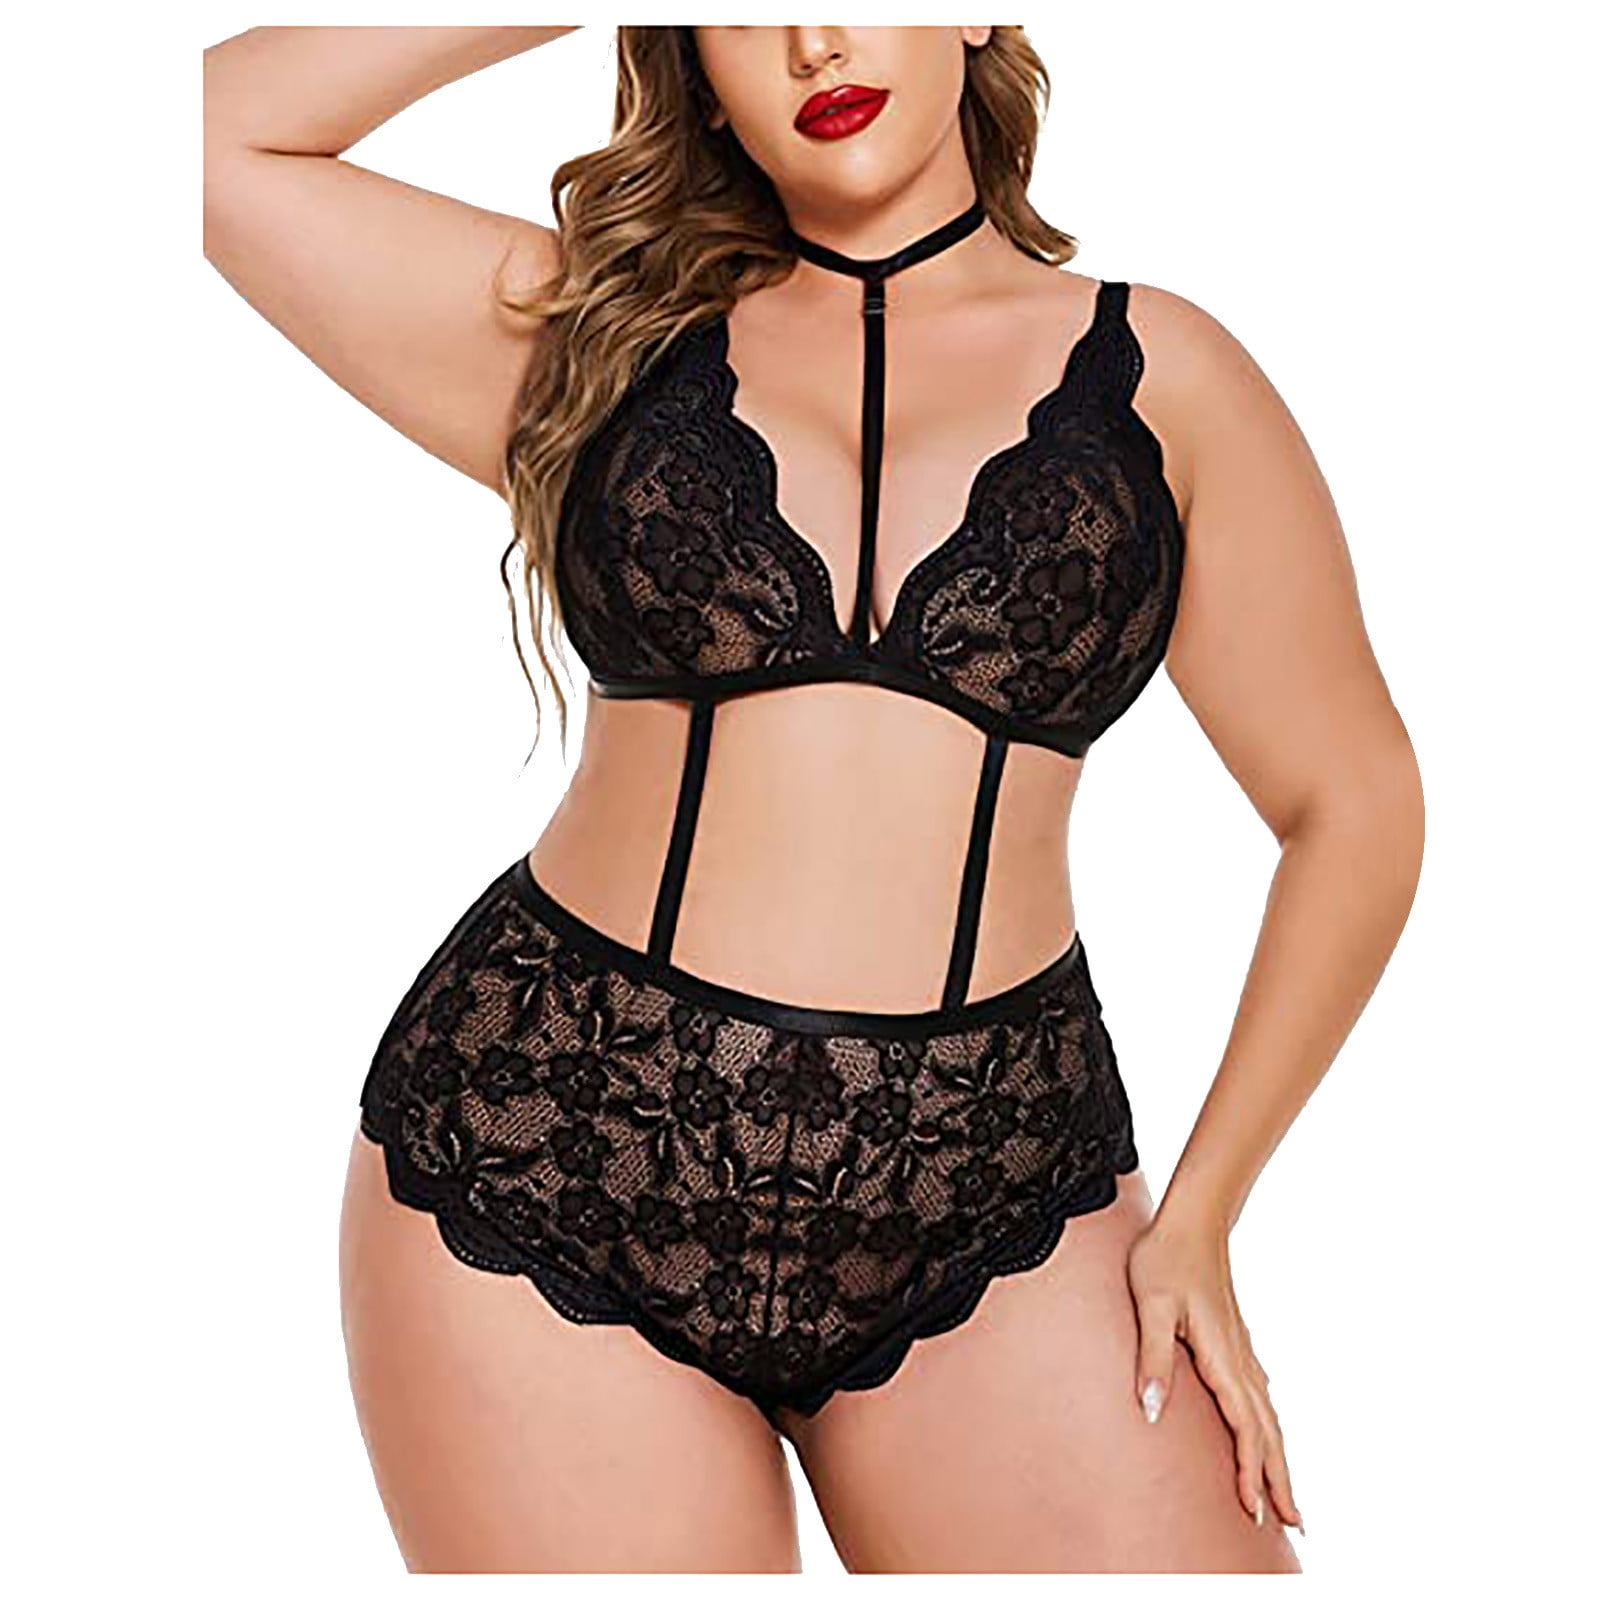 plus size lingerie for wives